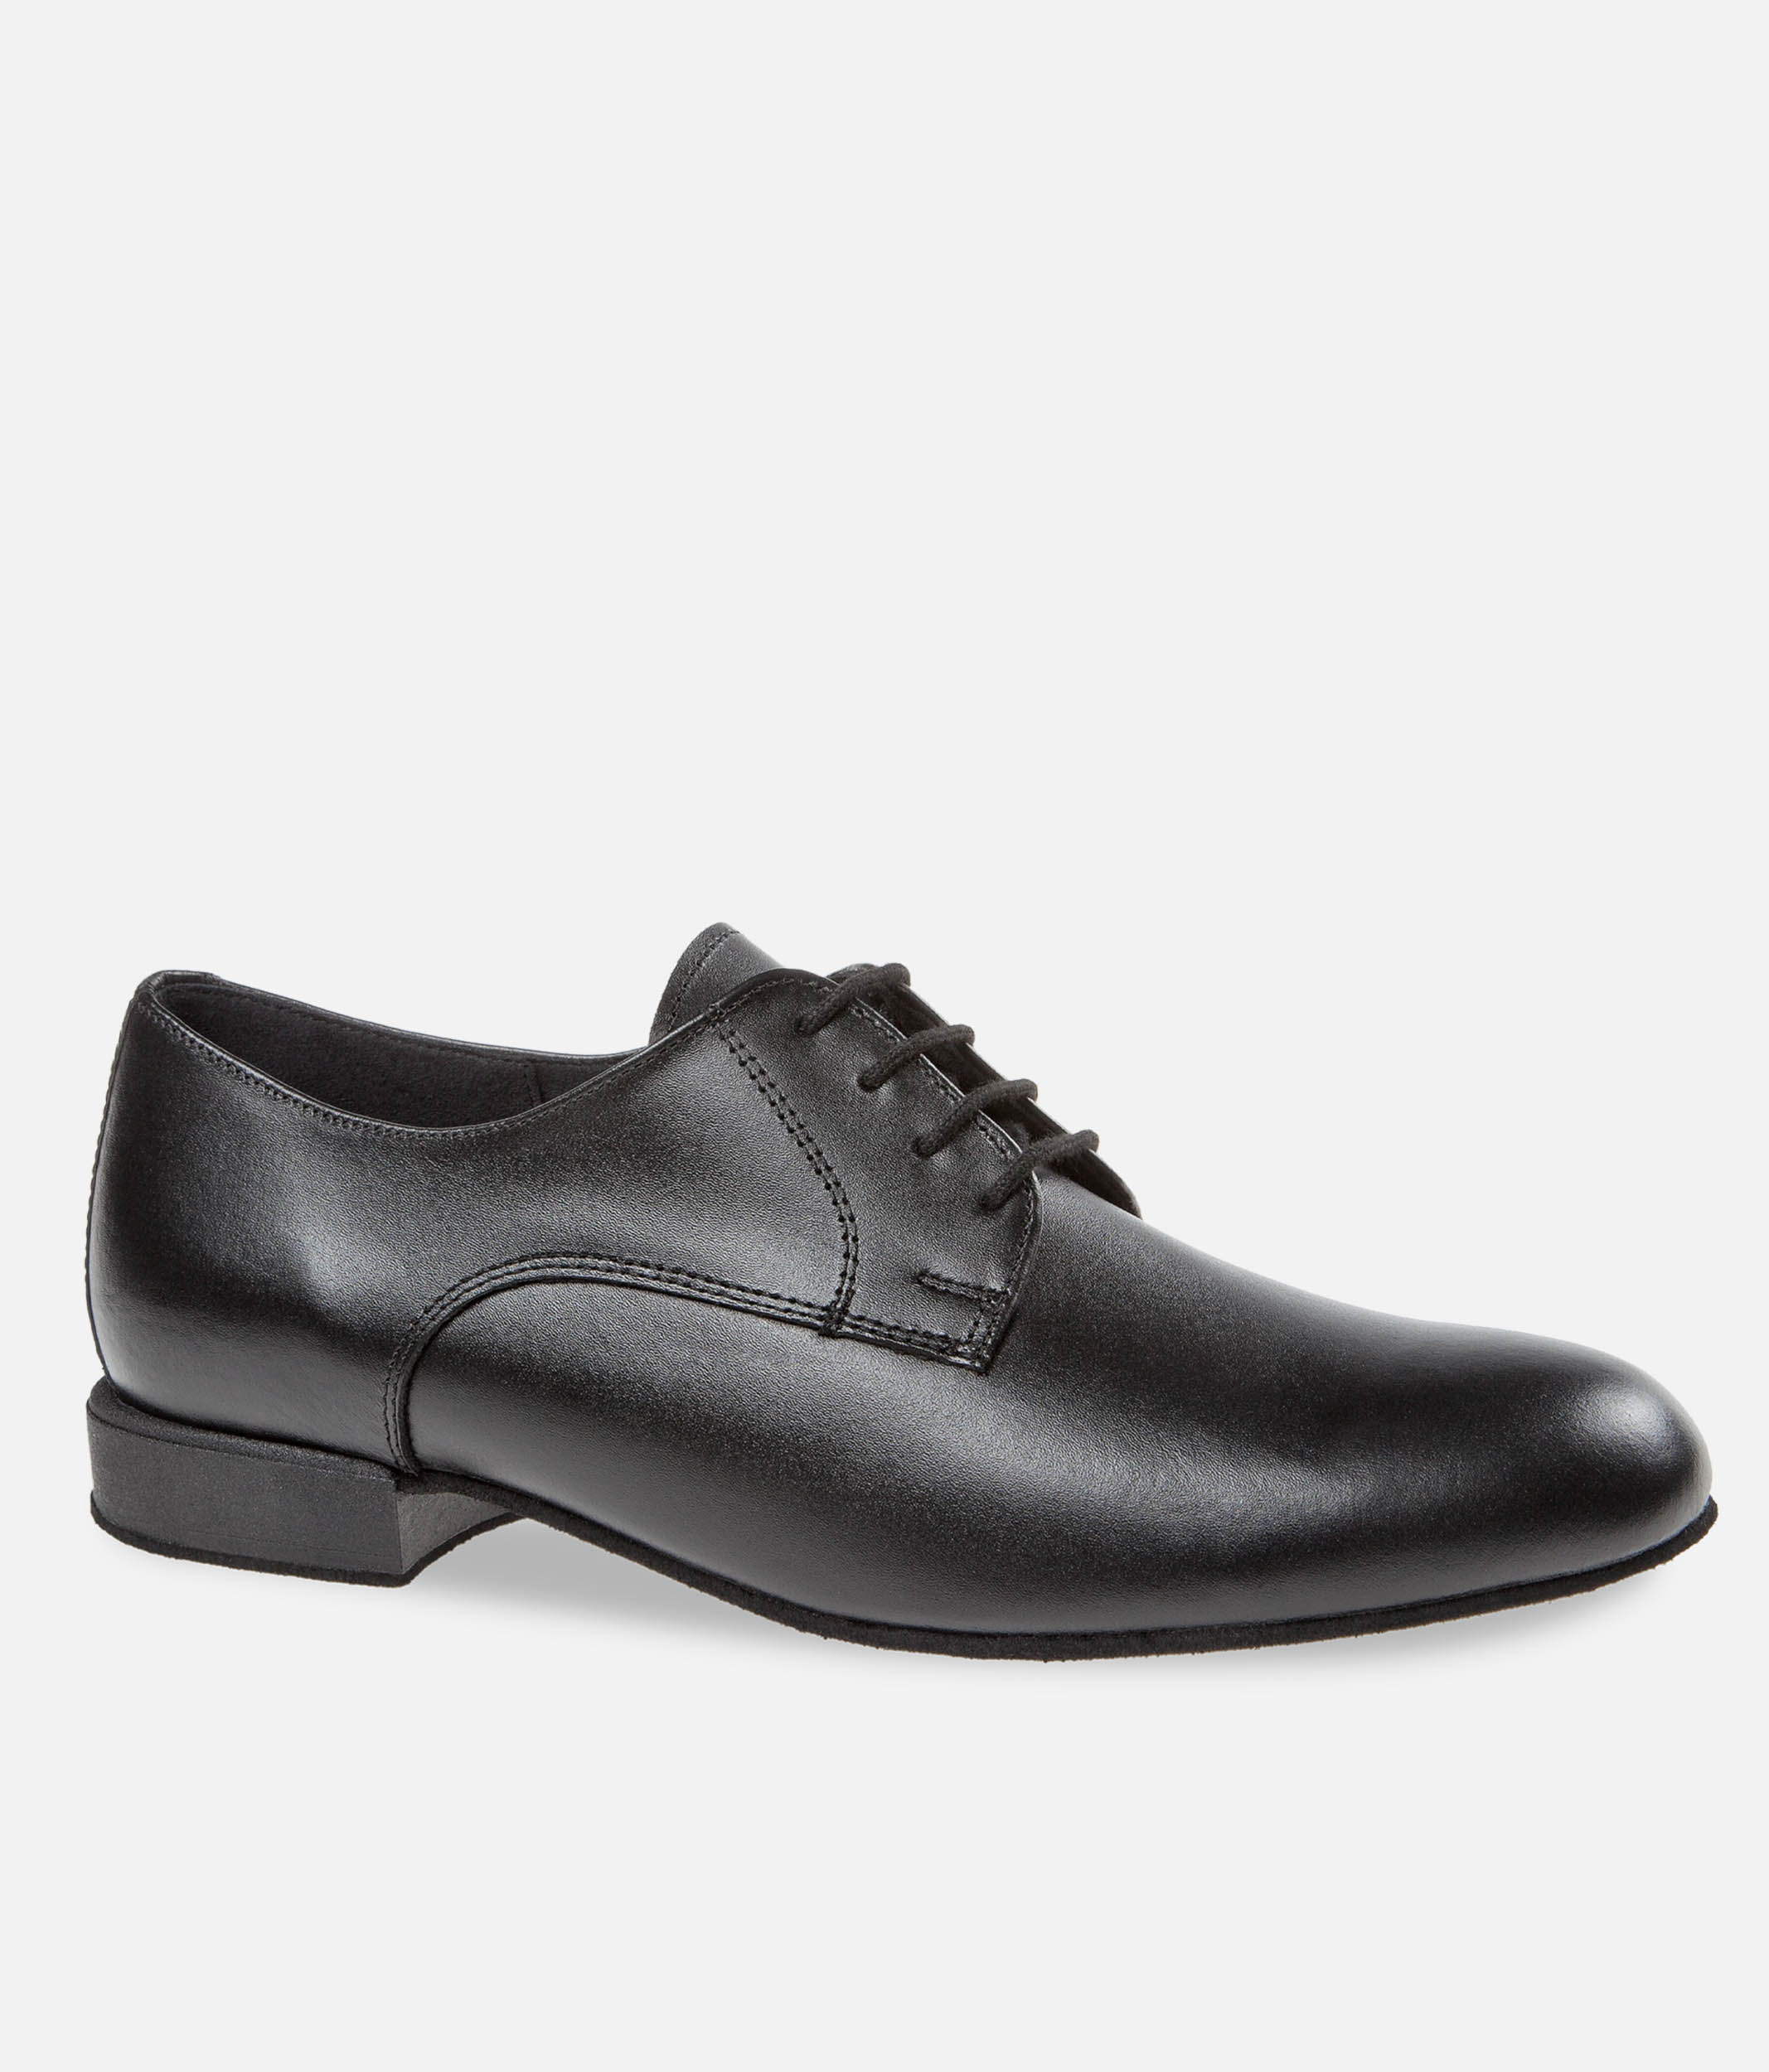 Derby Style Dance Shoes - 179